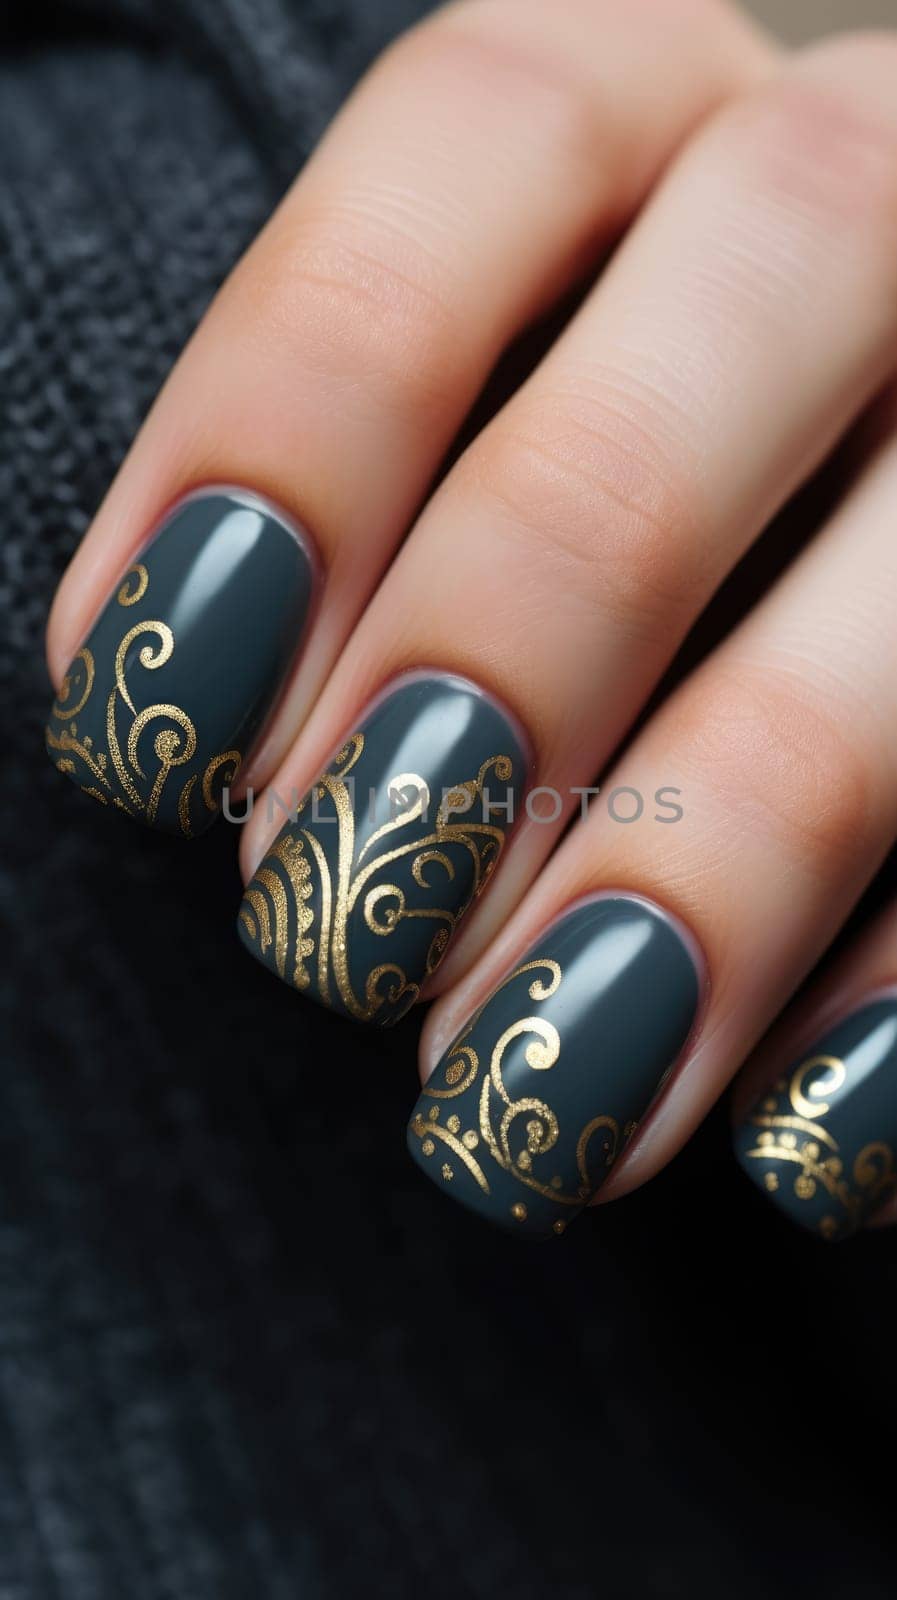 Matte black manicure with accent gold pattern by natali_brill